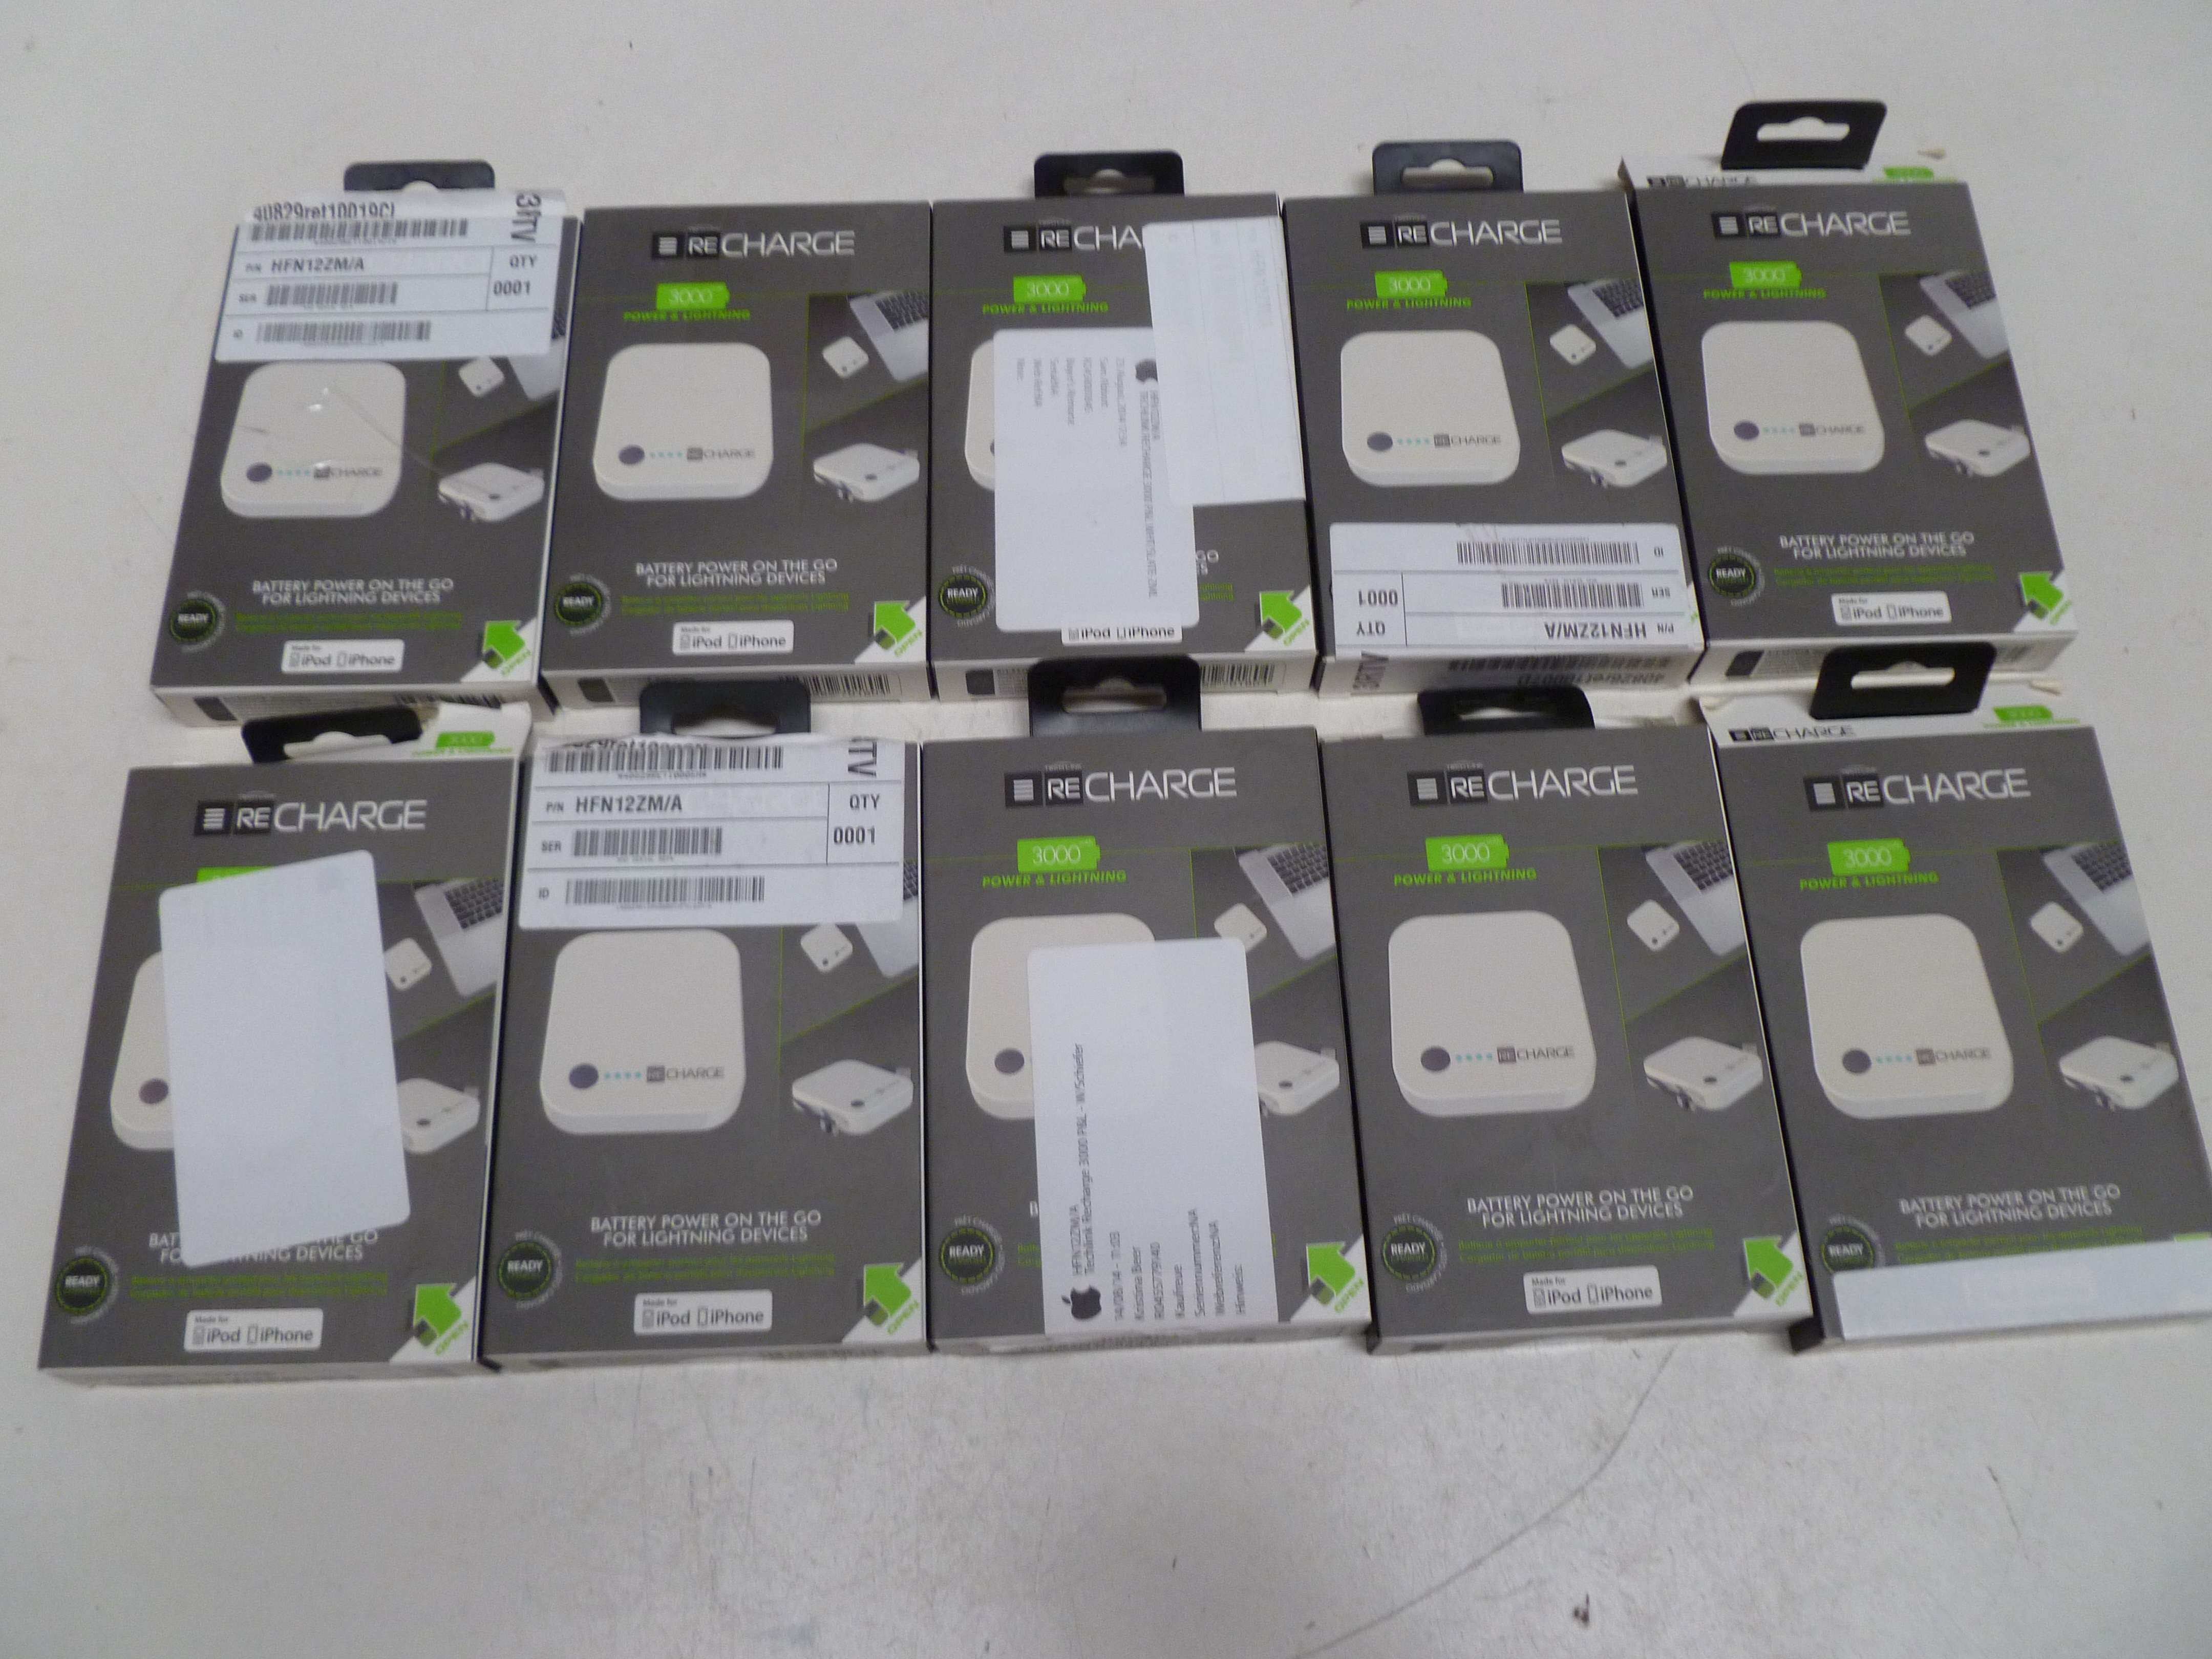 20 x Techlink Recharge 3000 Portable Pocket Power USB Charger Powerbank 3000mAh White untested customer returns